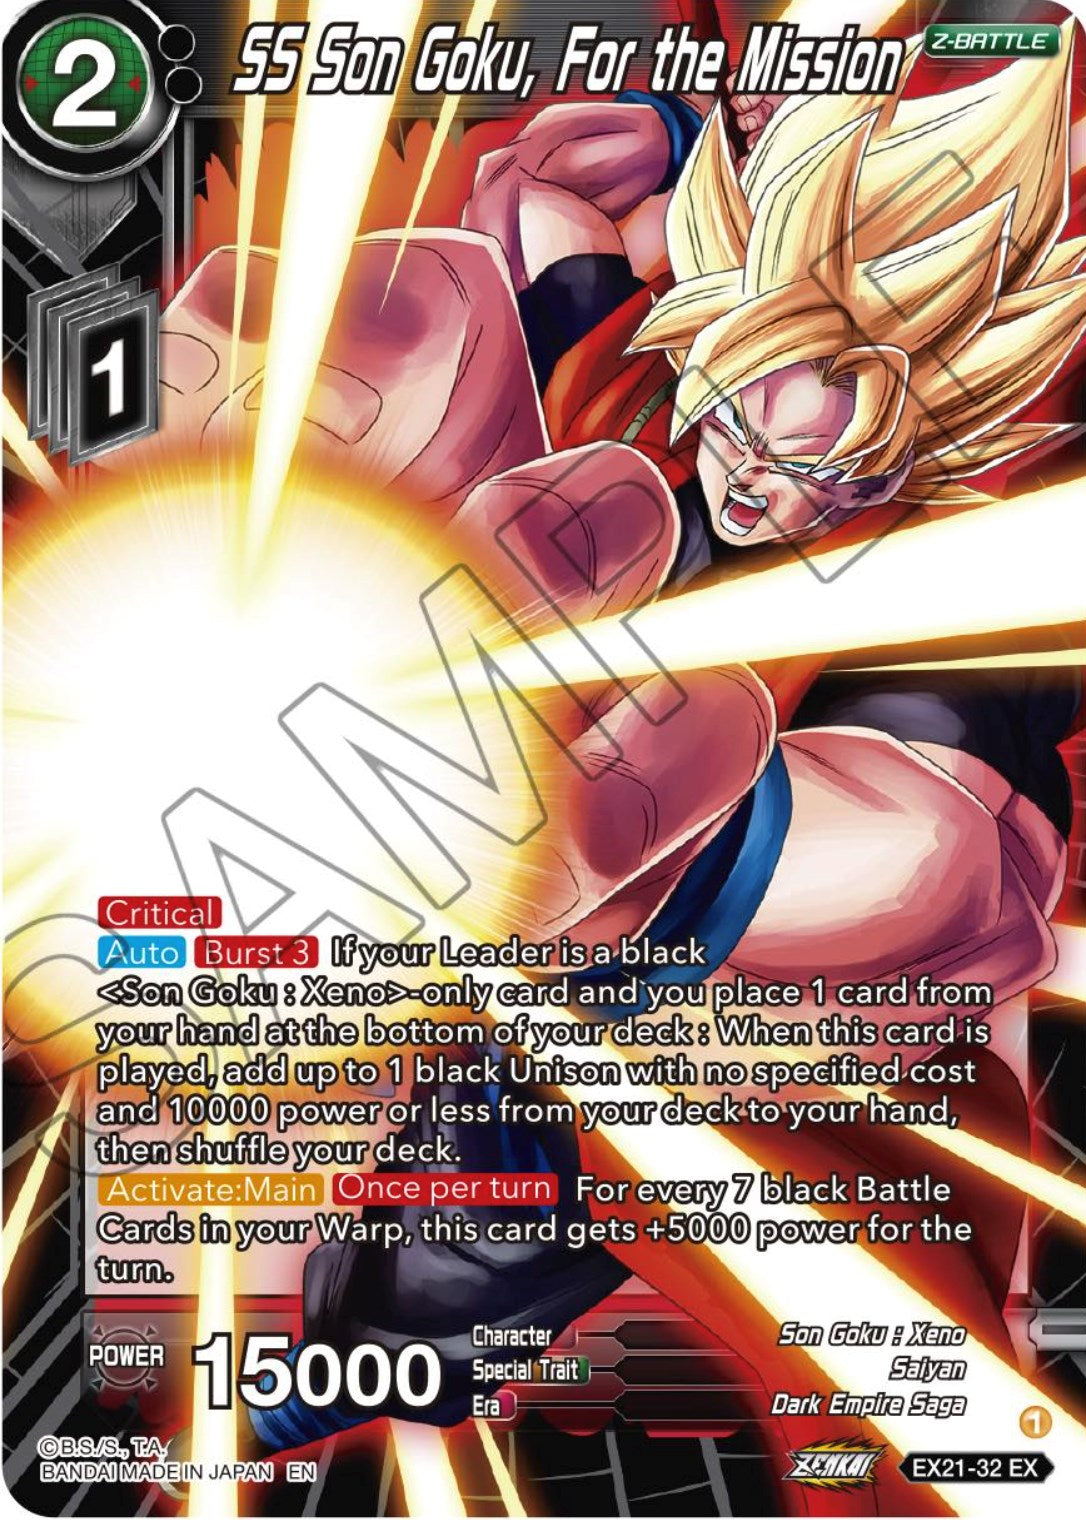 SS Son Goku, For the Mission (EX21-32) [5th Anniversary Set] | Sanctuary Gaming